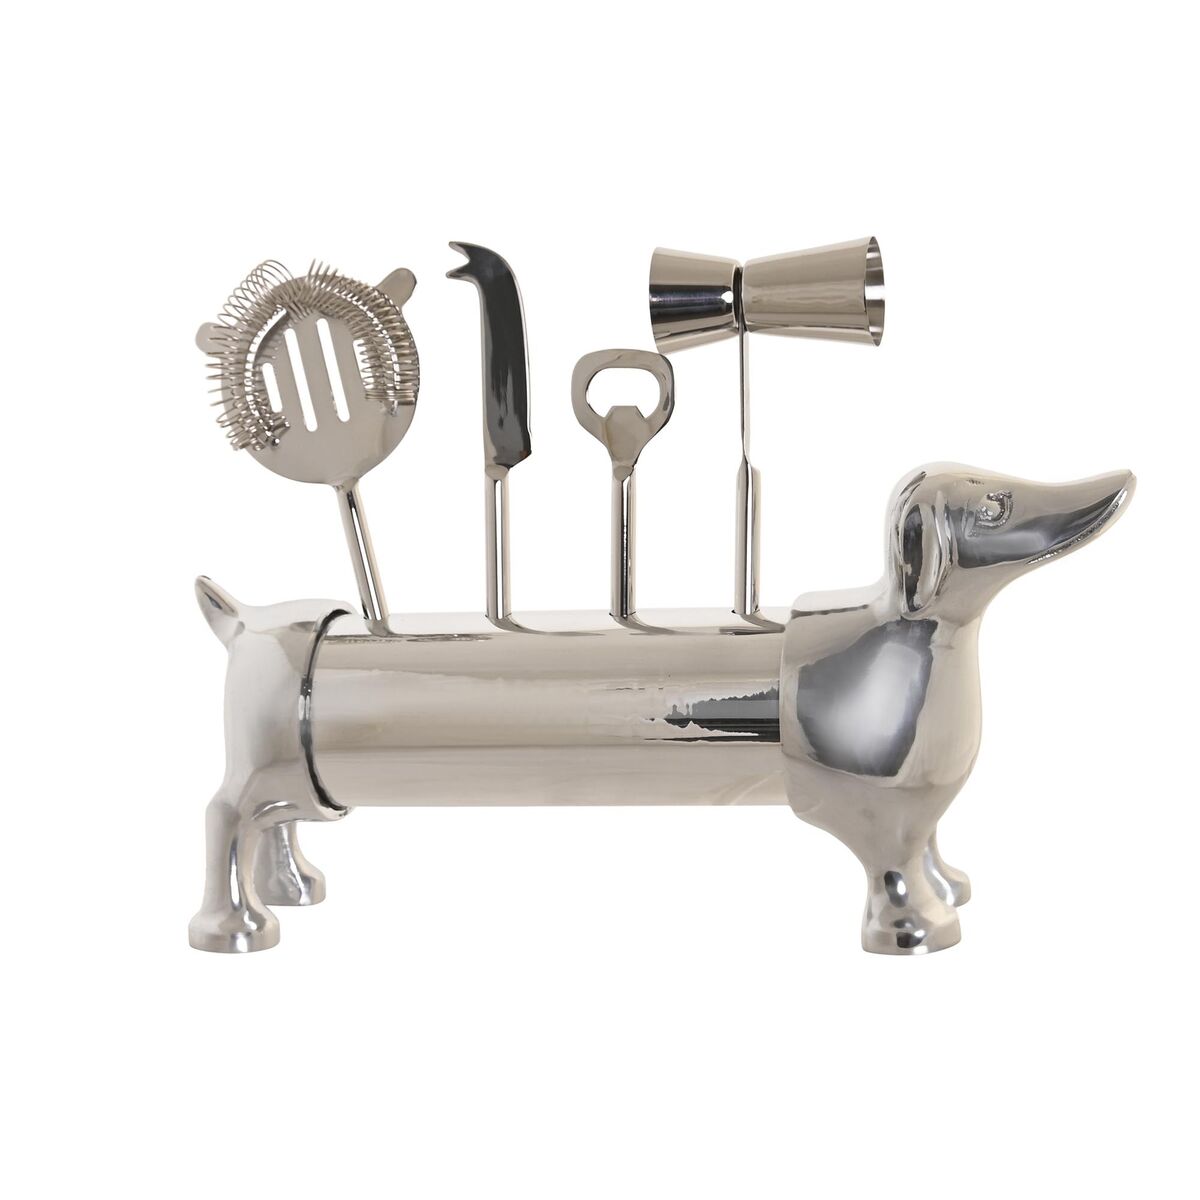 Cocktail Set DKD Home Decor 37 x 9 x 18 cm Silver Stainless steel